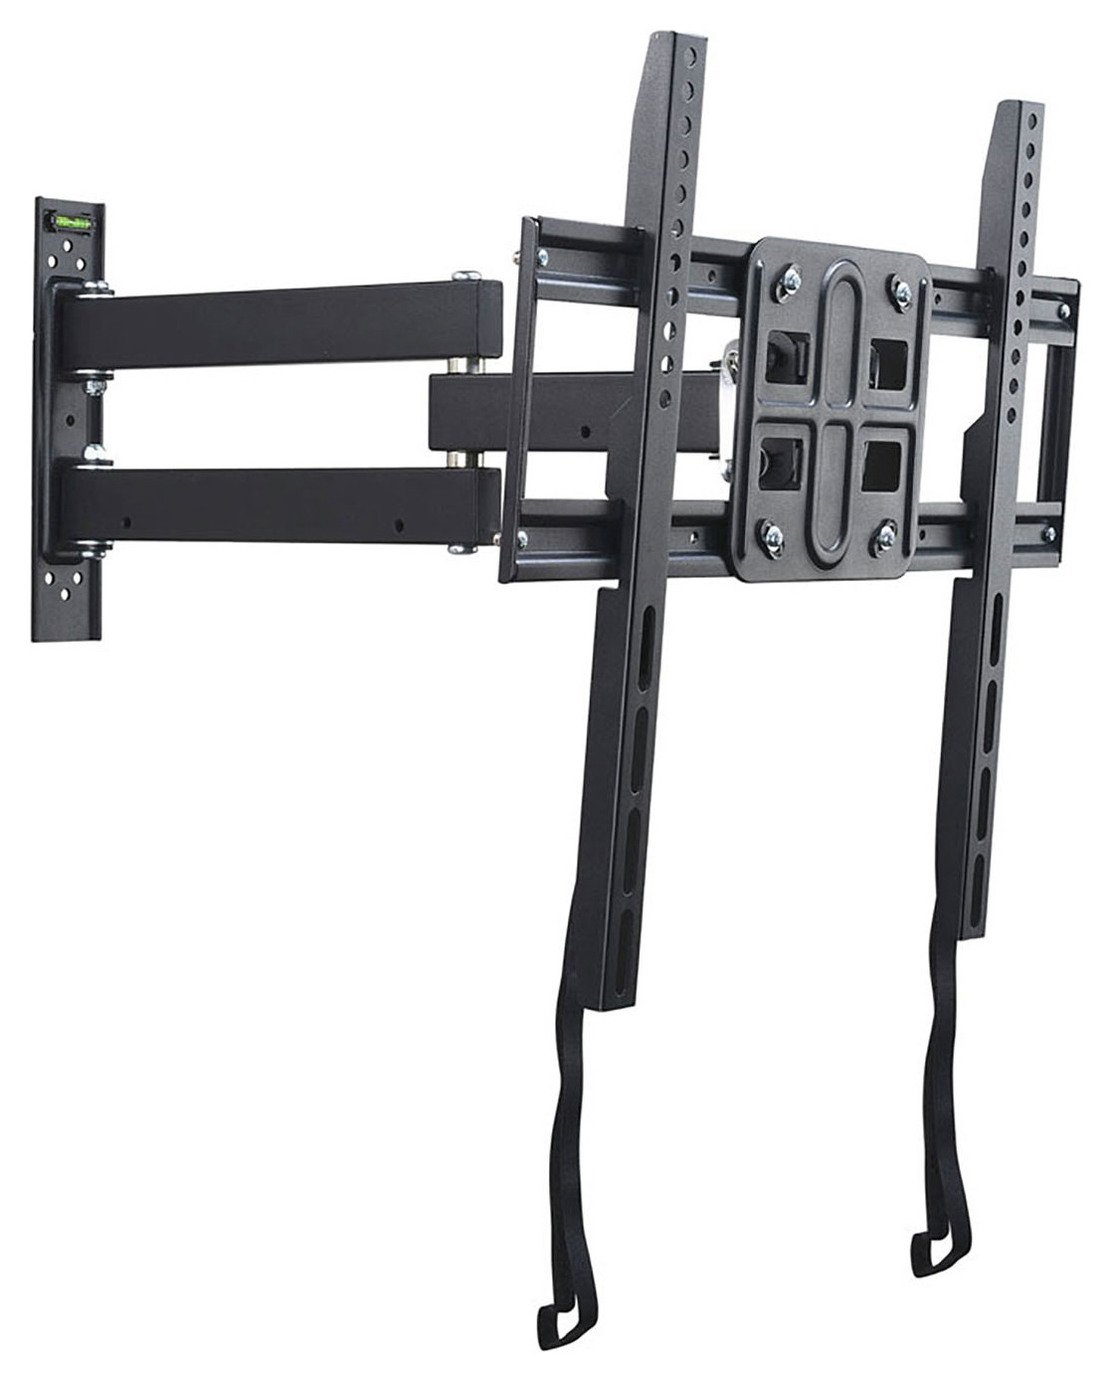 Standard Multi Position Up to 70 Inch TV Wall Bracket